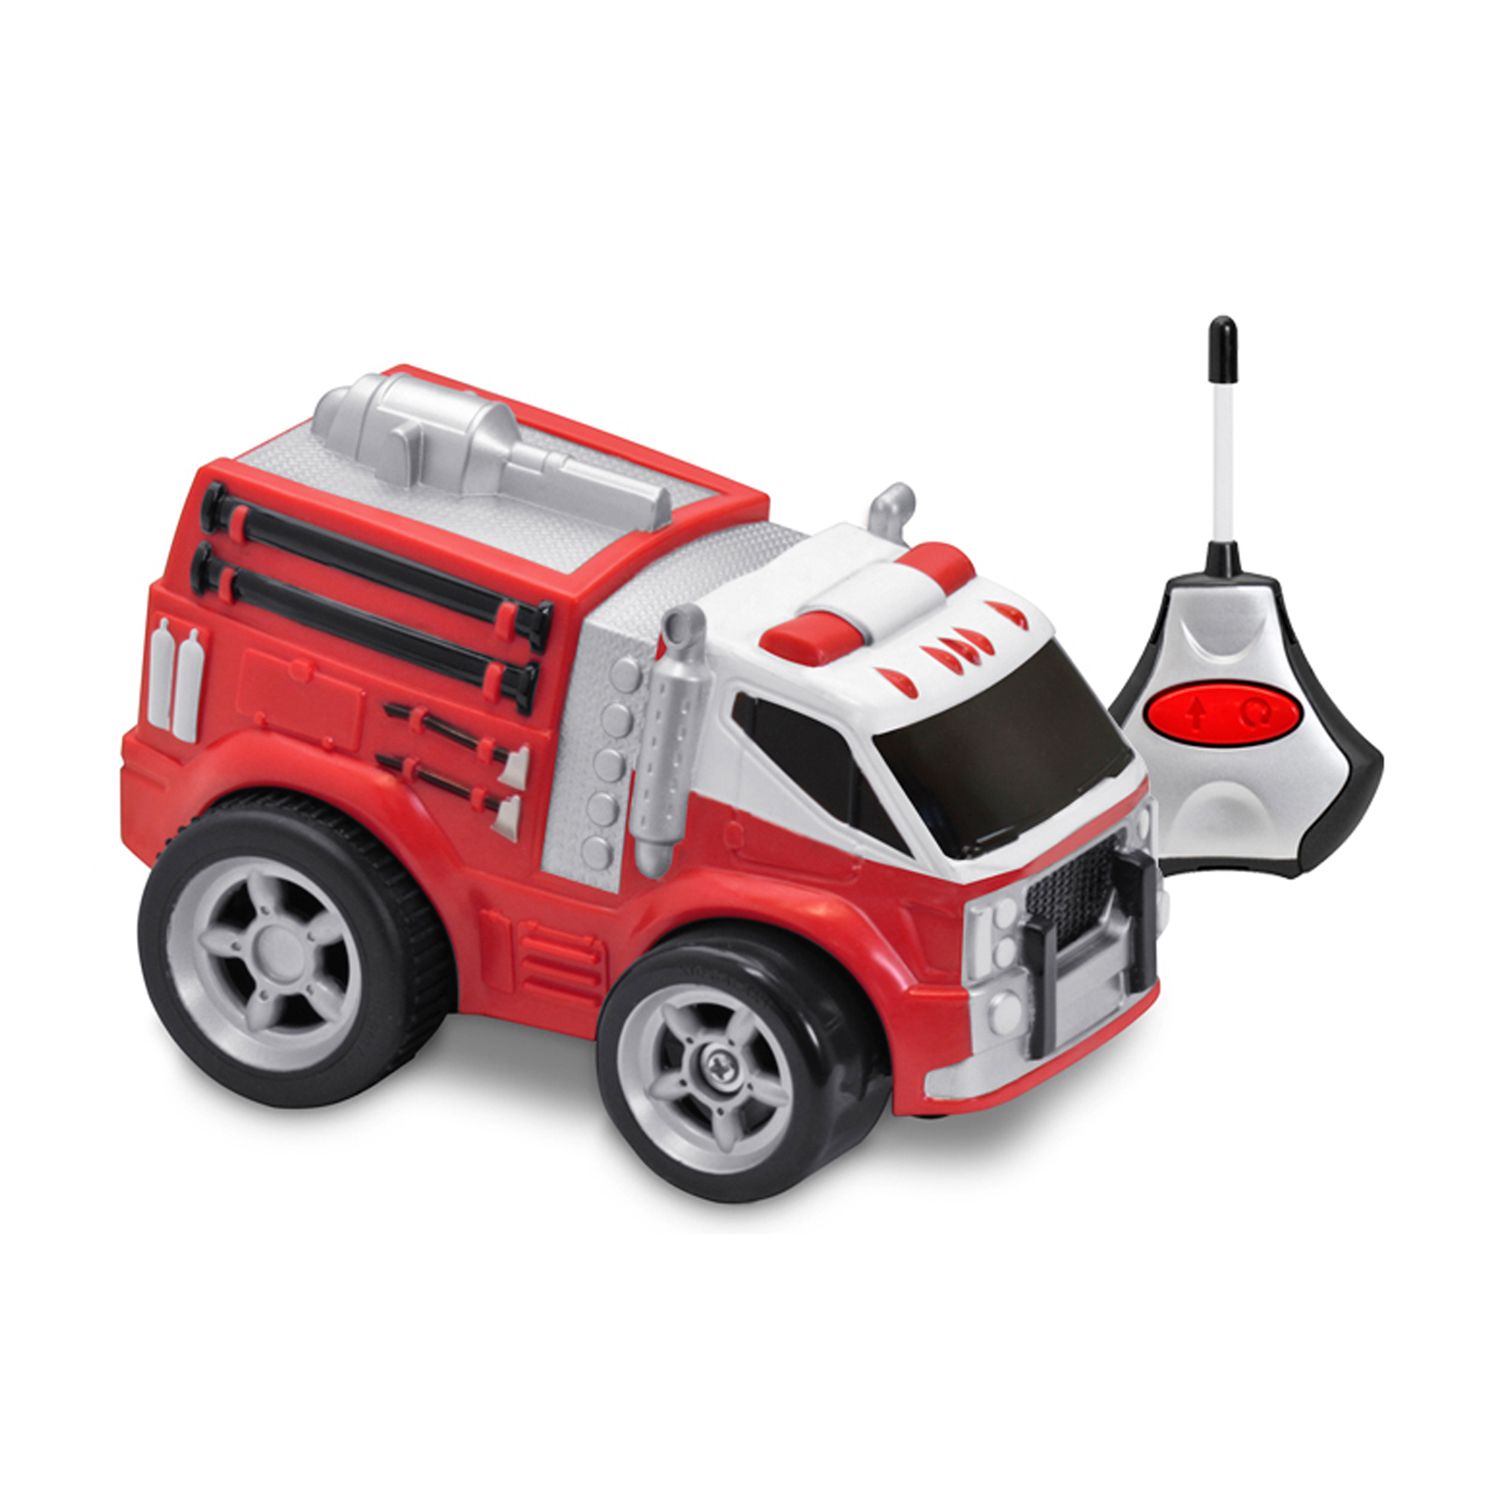 radio controlled fire truck